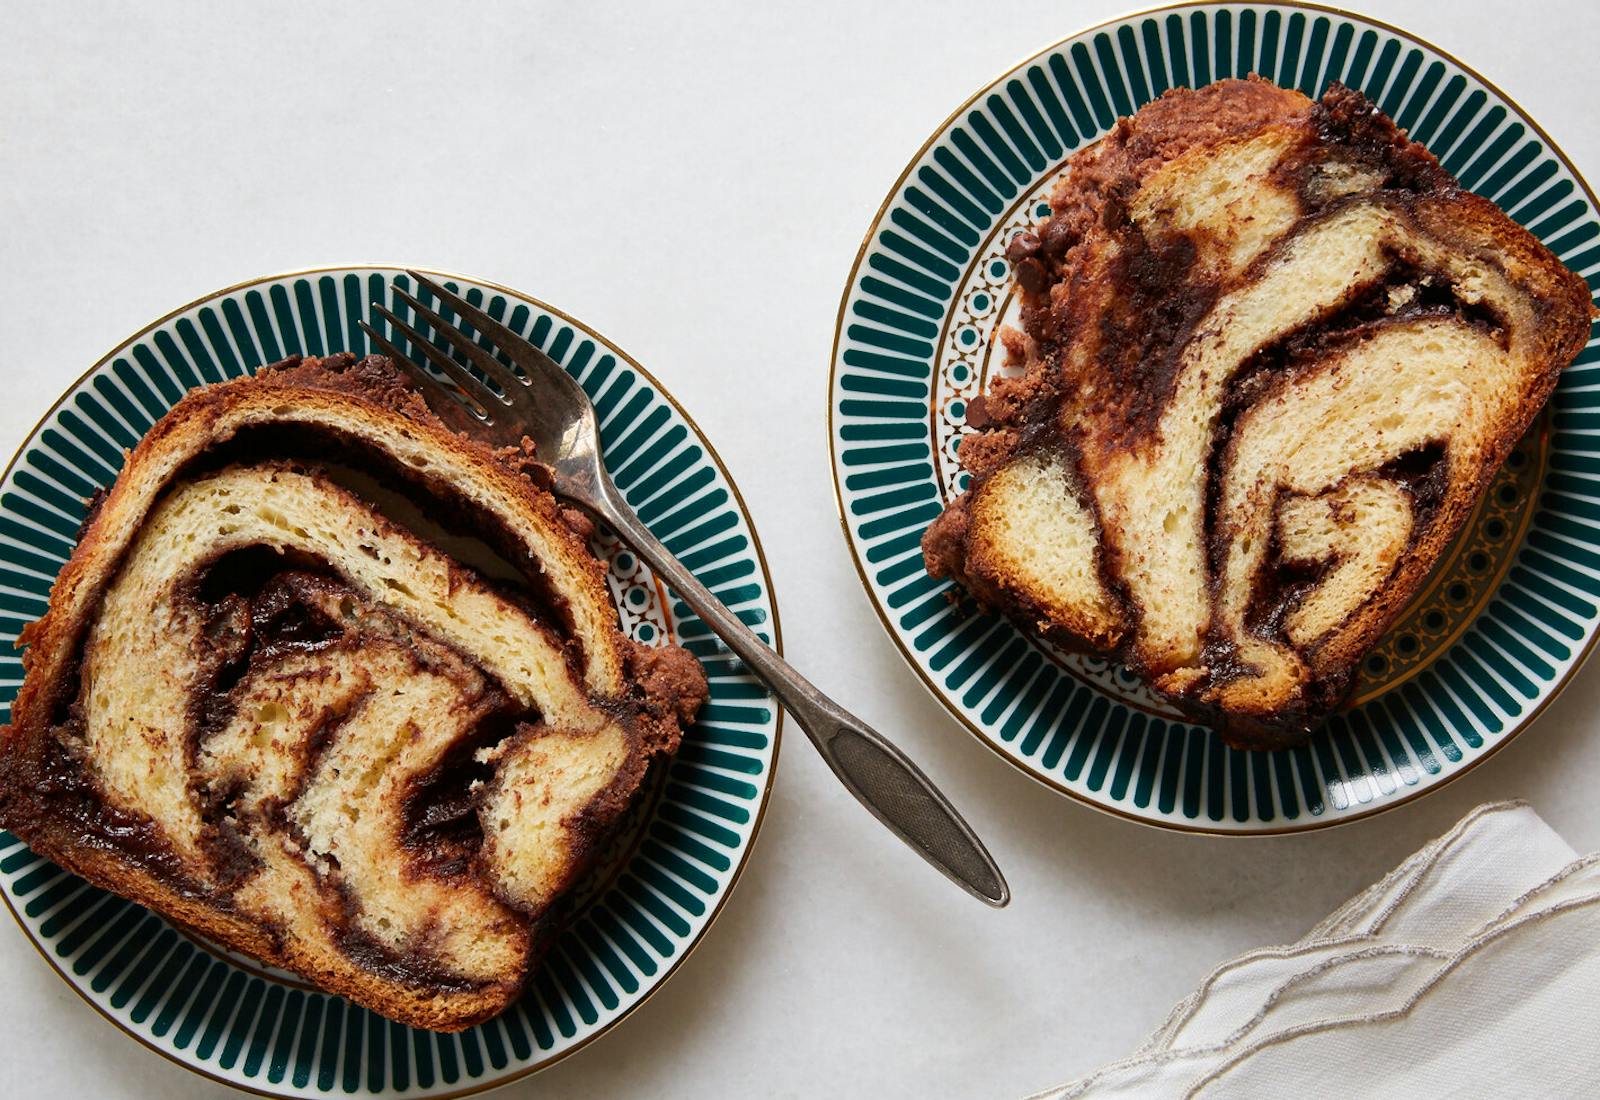 Two slices of chocolate babka on blue and white print plates atop white surface.